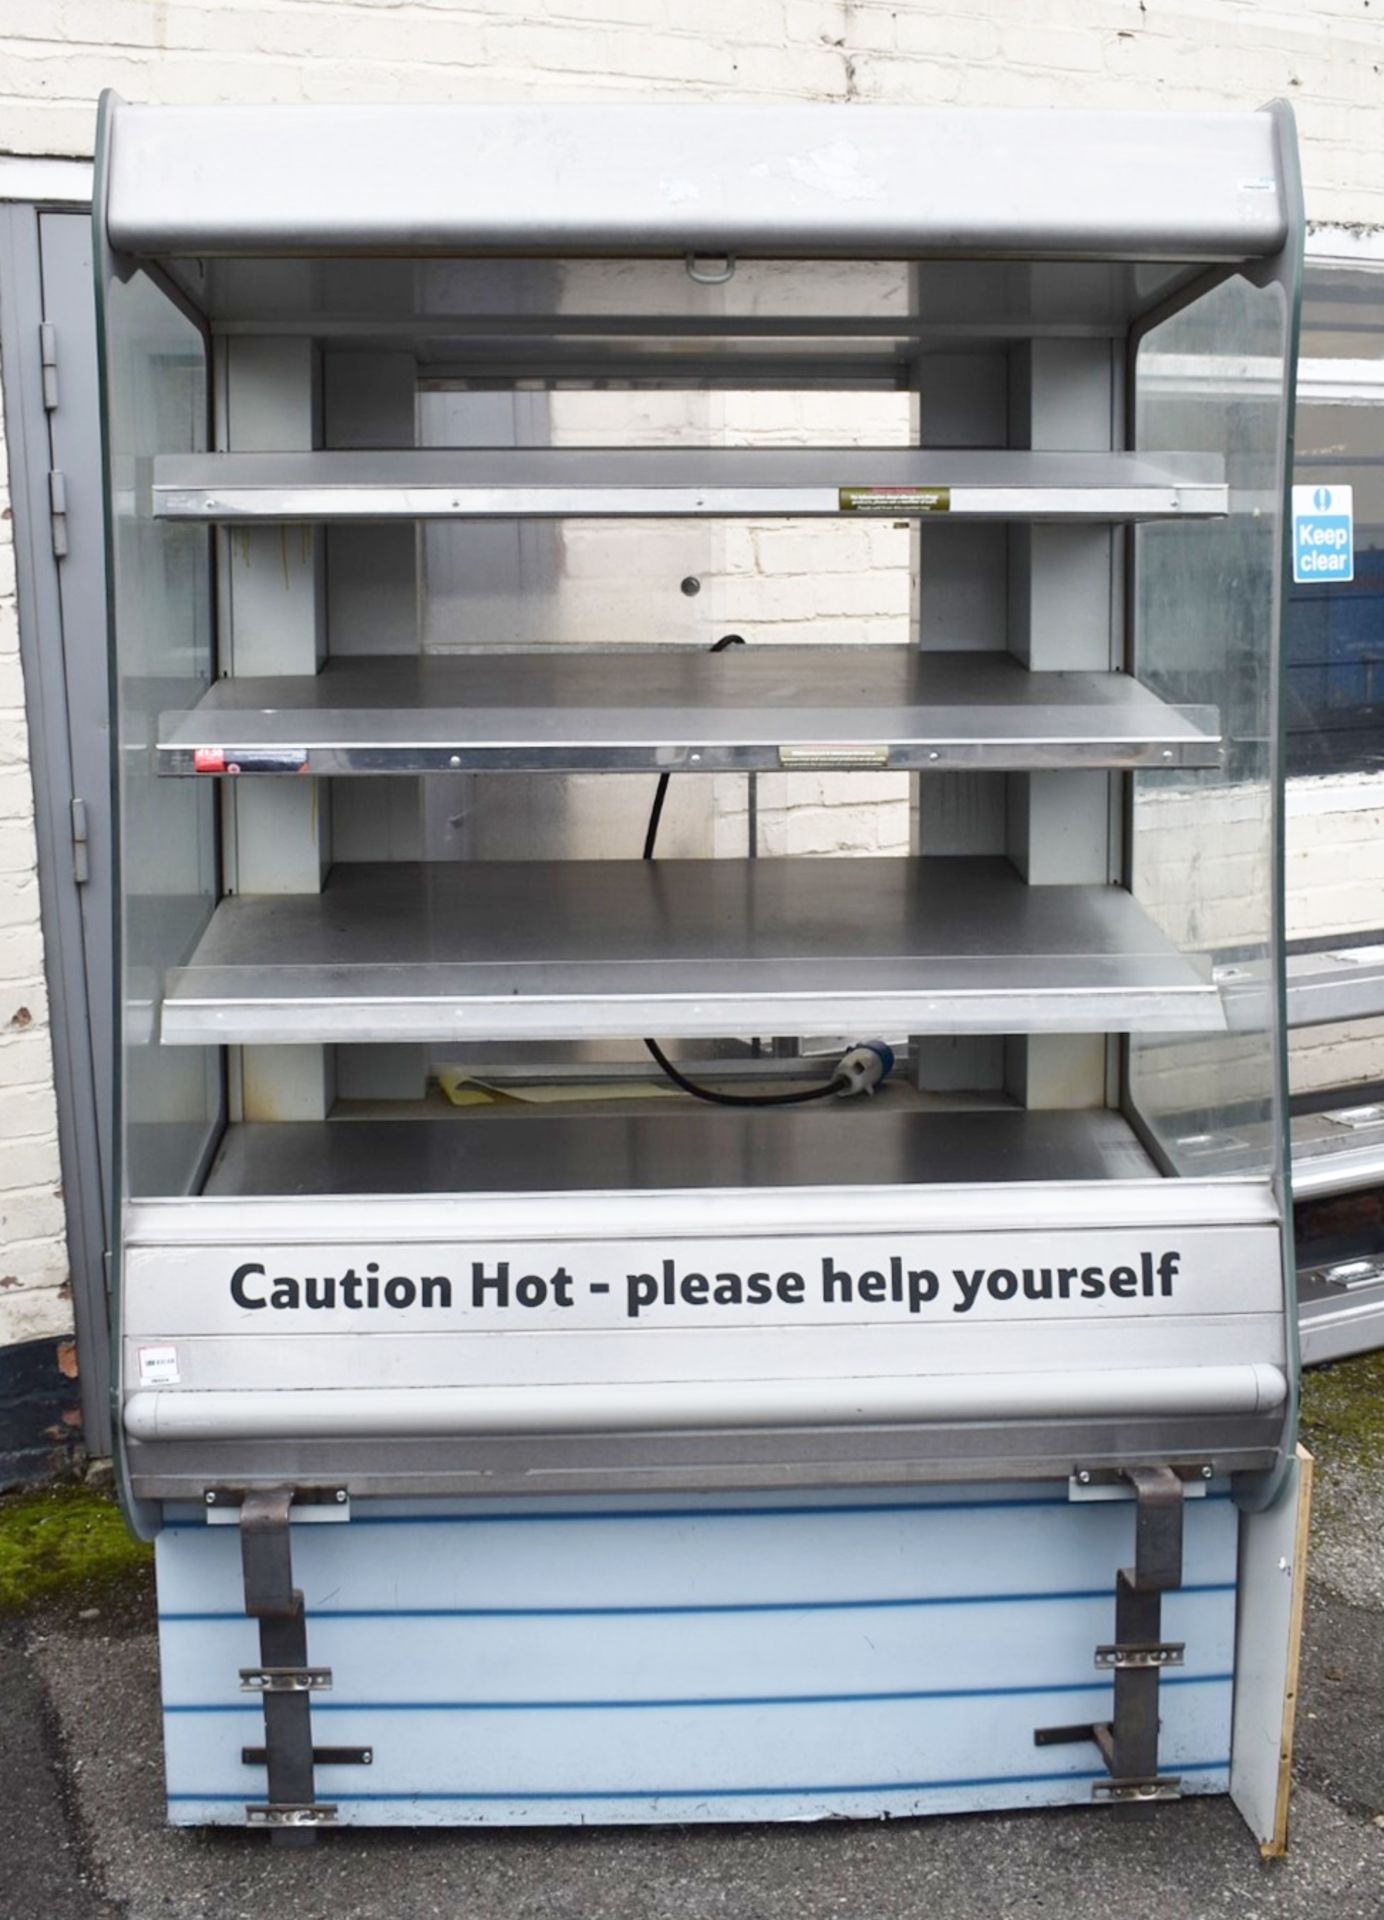 3 x BBQ King BKI MHC4 Hot Multi-tier Display Case/Heated Merchandiser Display Units With Rear Access - Image 2 of 10